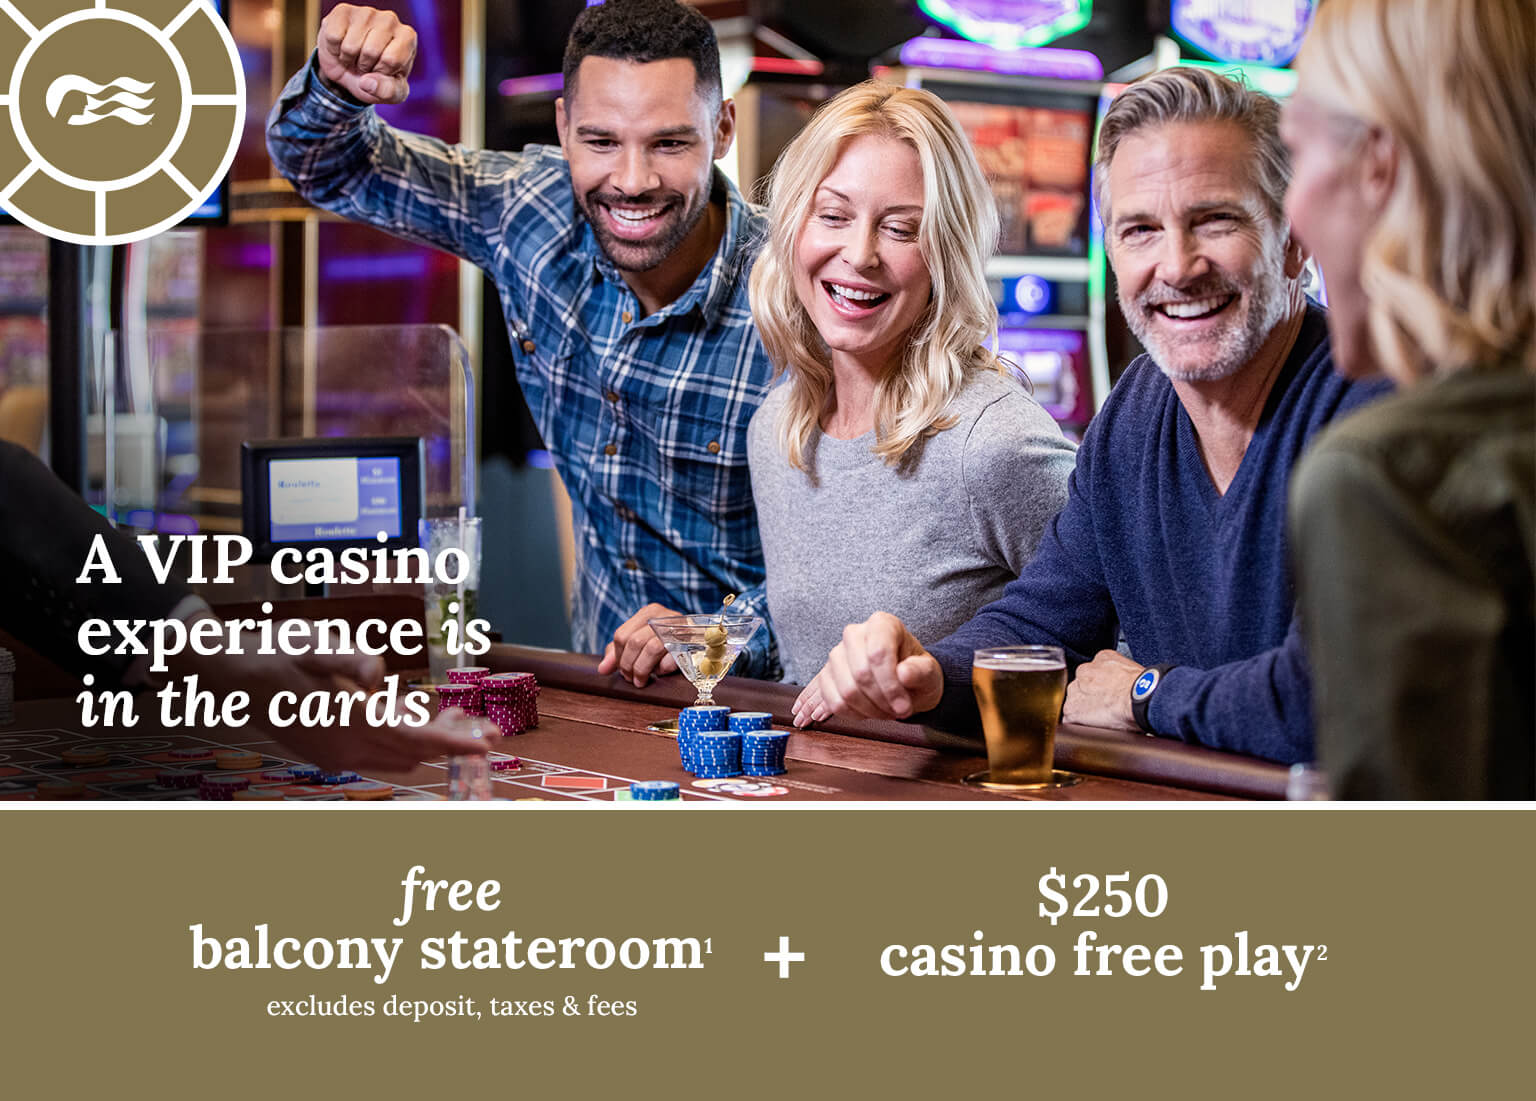 A VIP casino experience is in the cards. Free balcony stateroom + $250 casino free play + princess plus with drinks, Wi-Fi, and crew appreciation included. Click here to book.